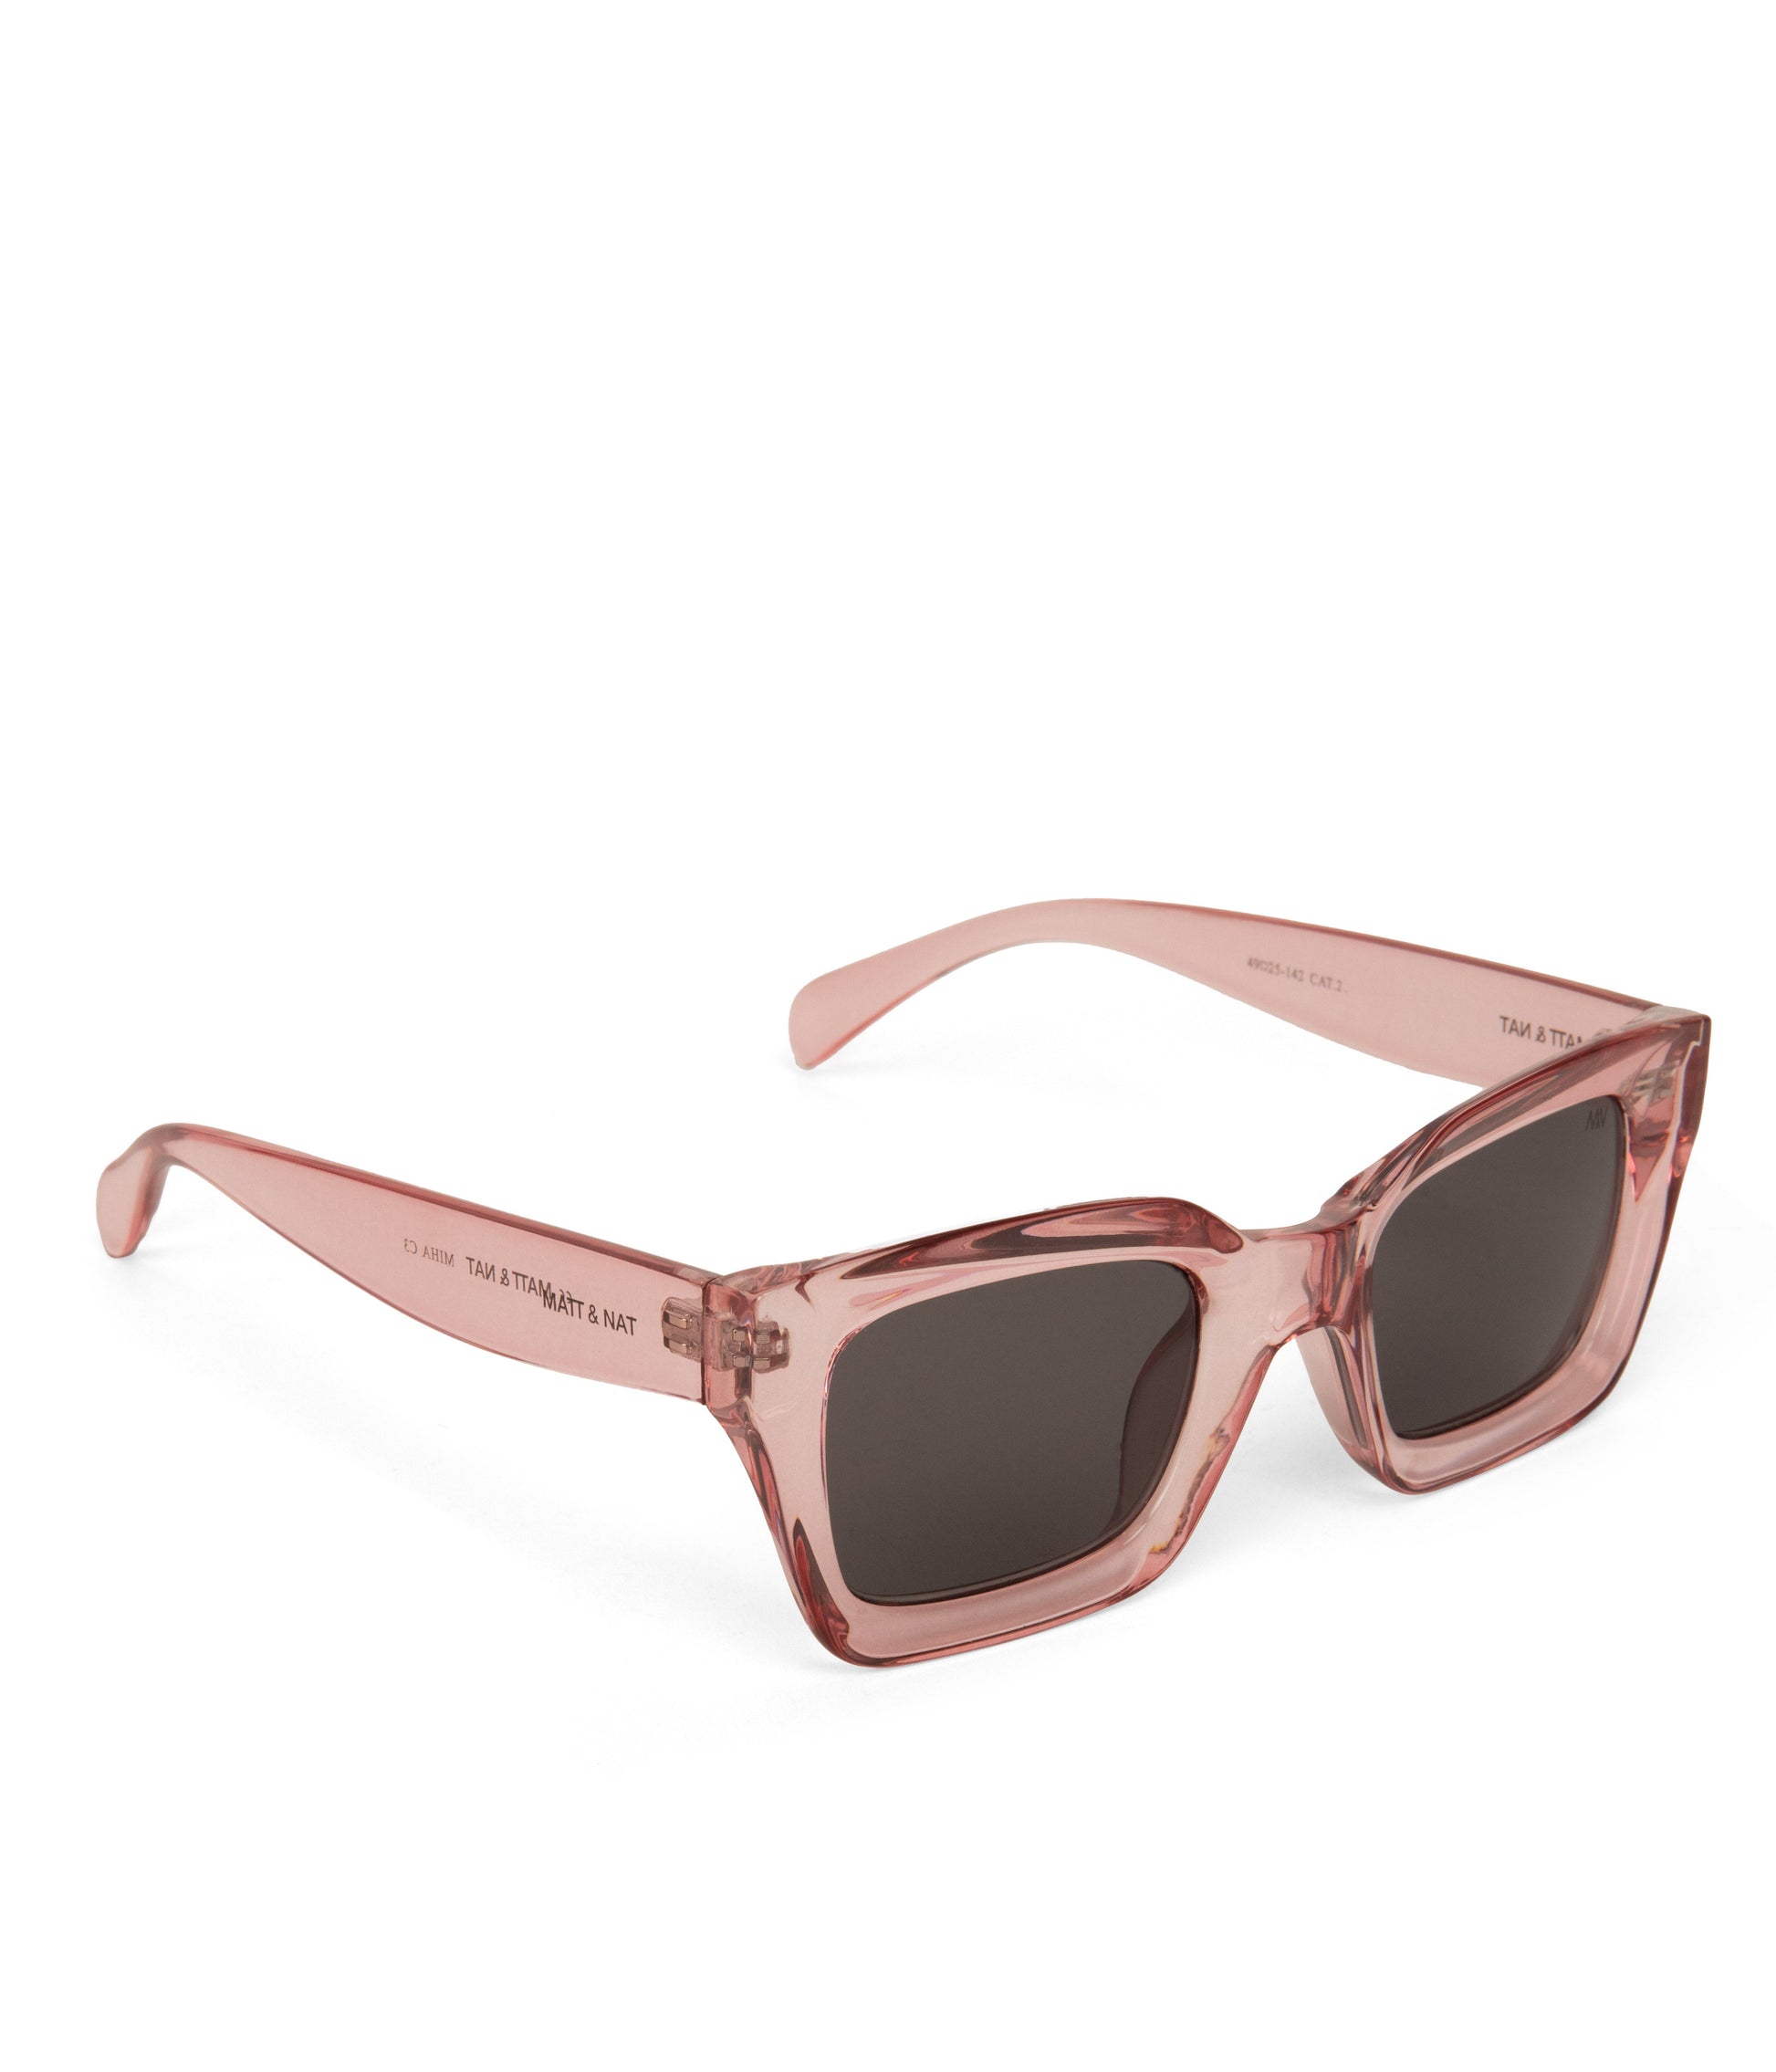 MEHA-2 Recycled Square Sunglasses | Color: Pink, Grey - variant::rose